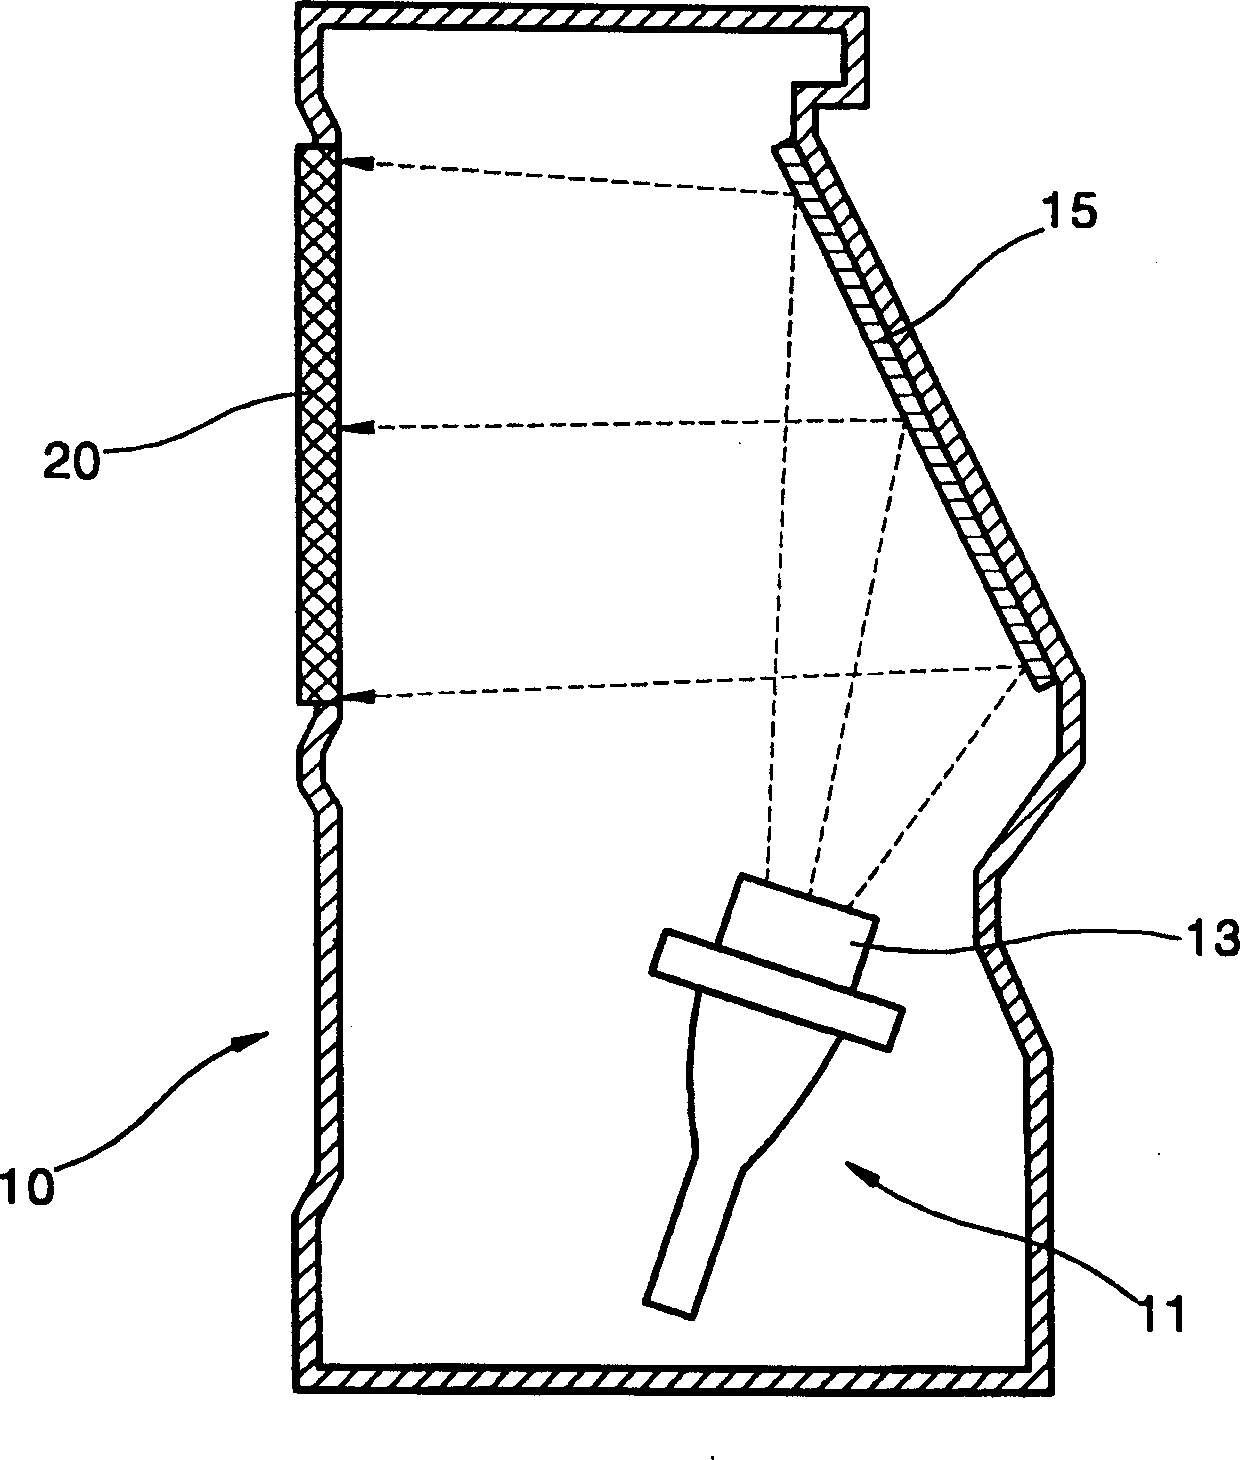 Apparatus for increasing brightness of projection television